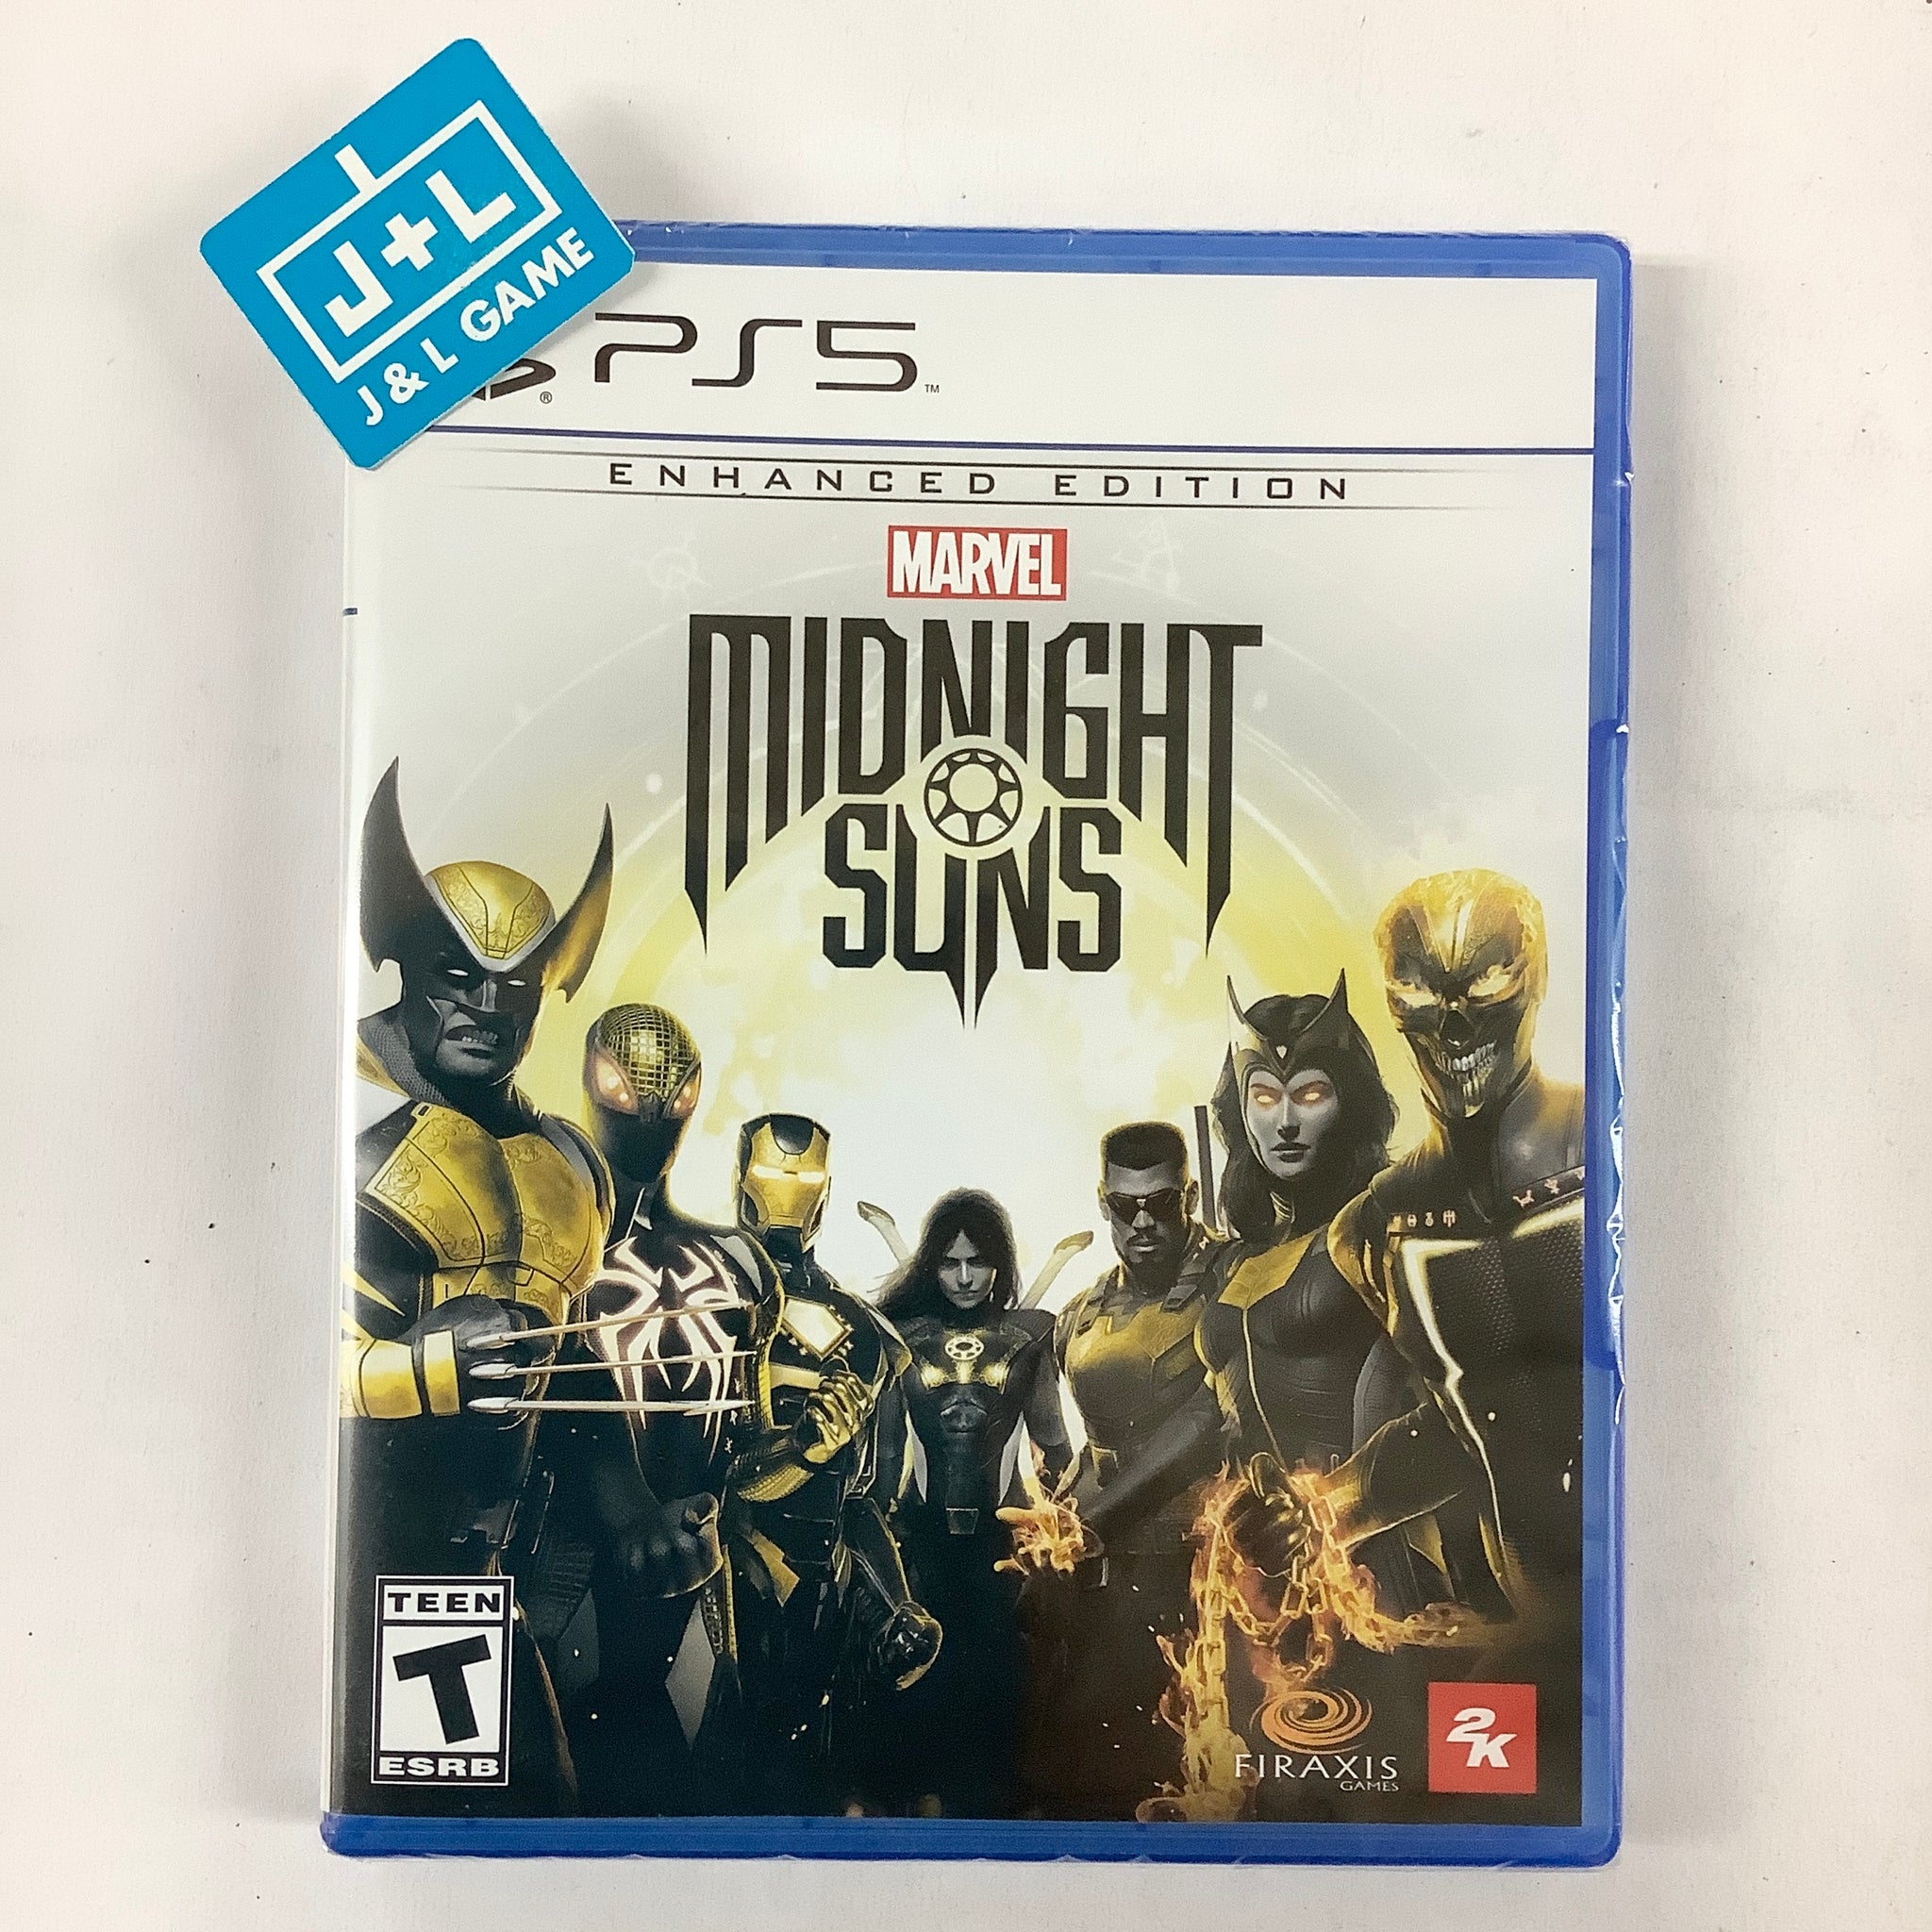 Marvel's Midnight Suns for PS5, Xbox Series, and PC launches